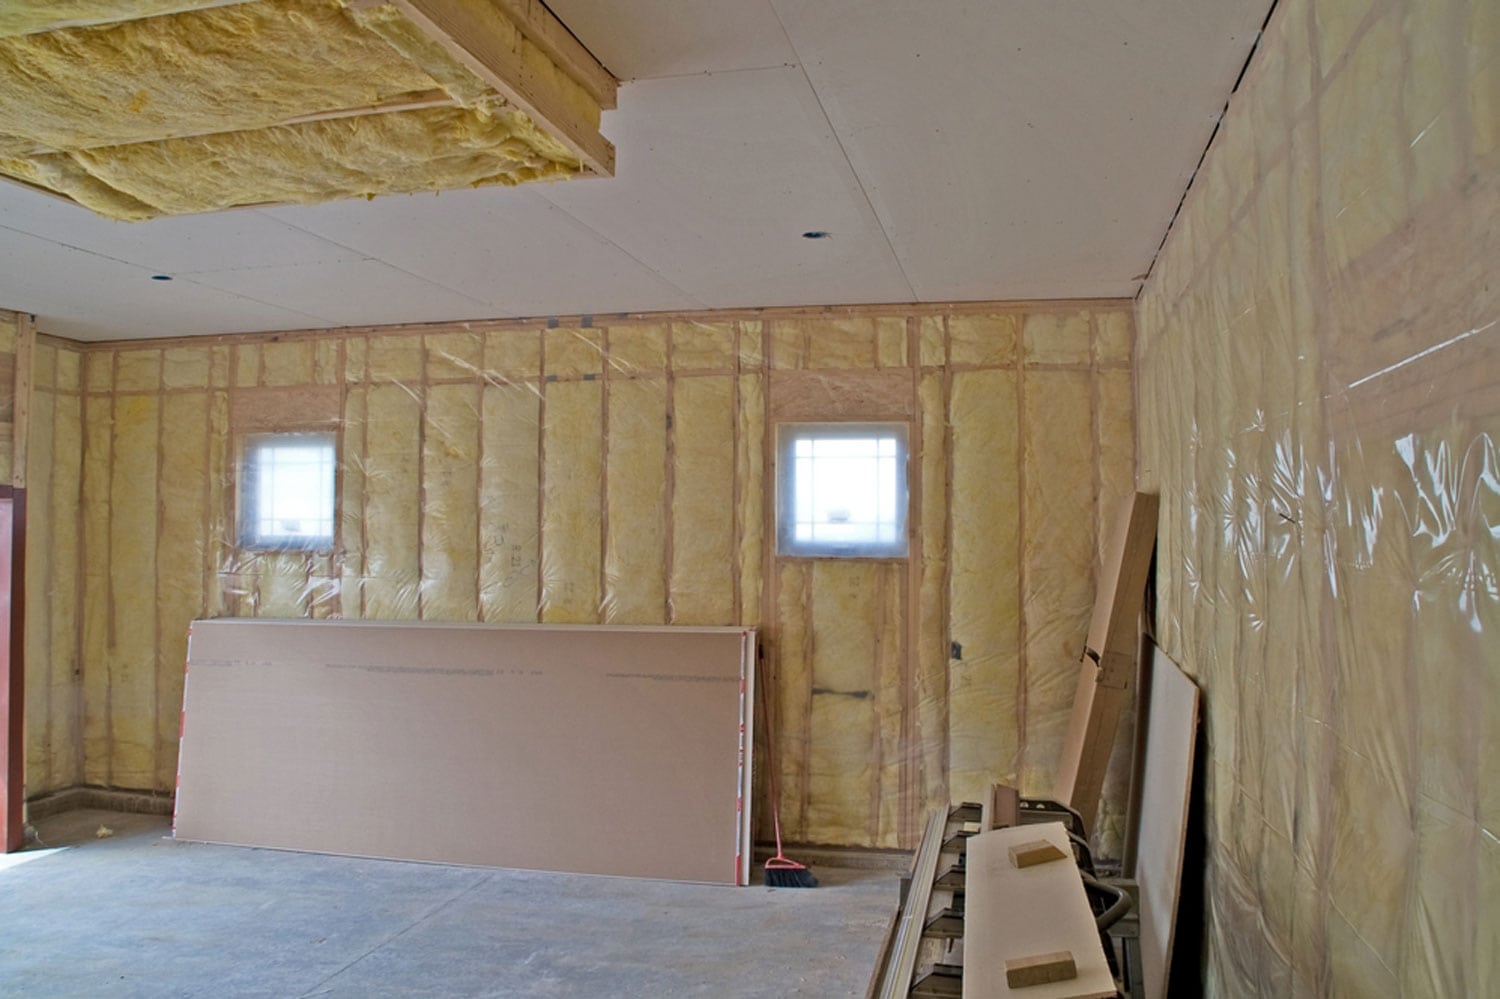 How To Insulate Finished Garage Walls, Will Insulating My Garage Ceiling Keep It Cooler